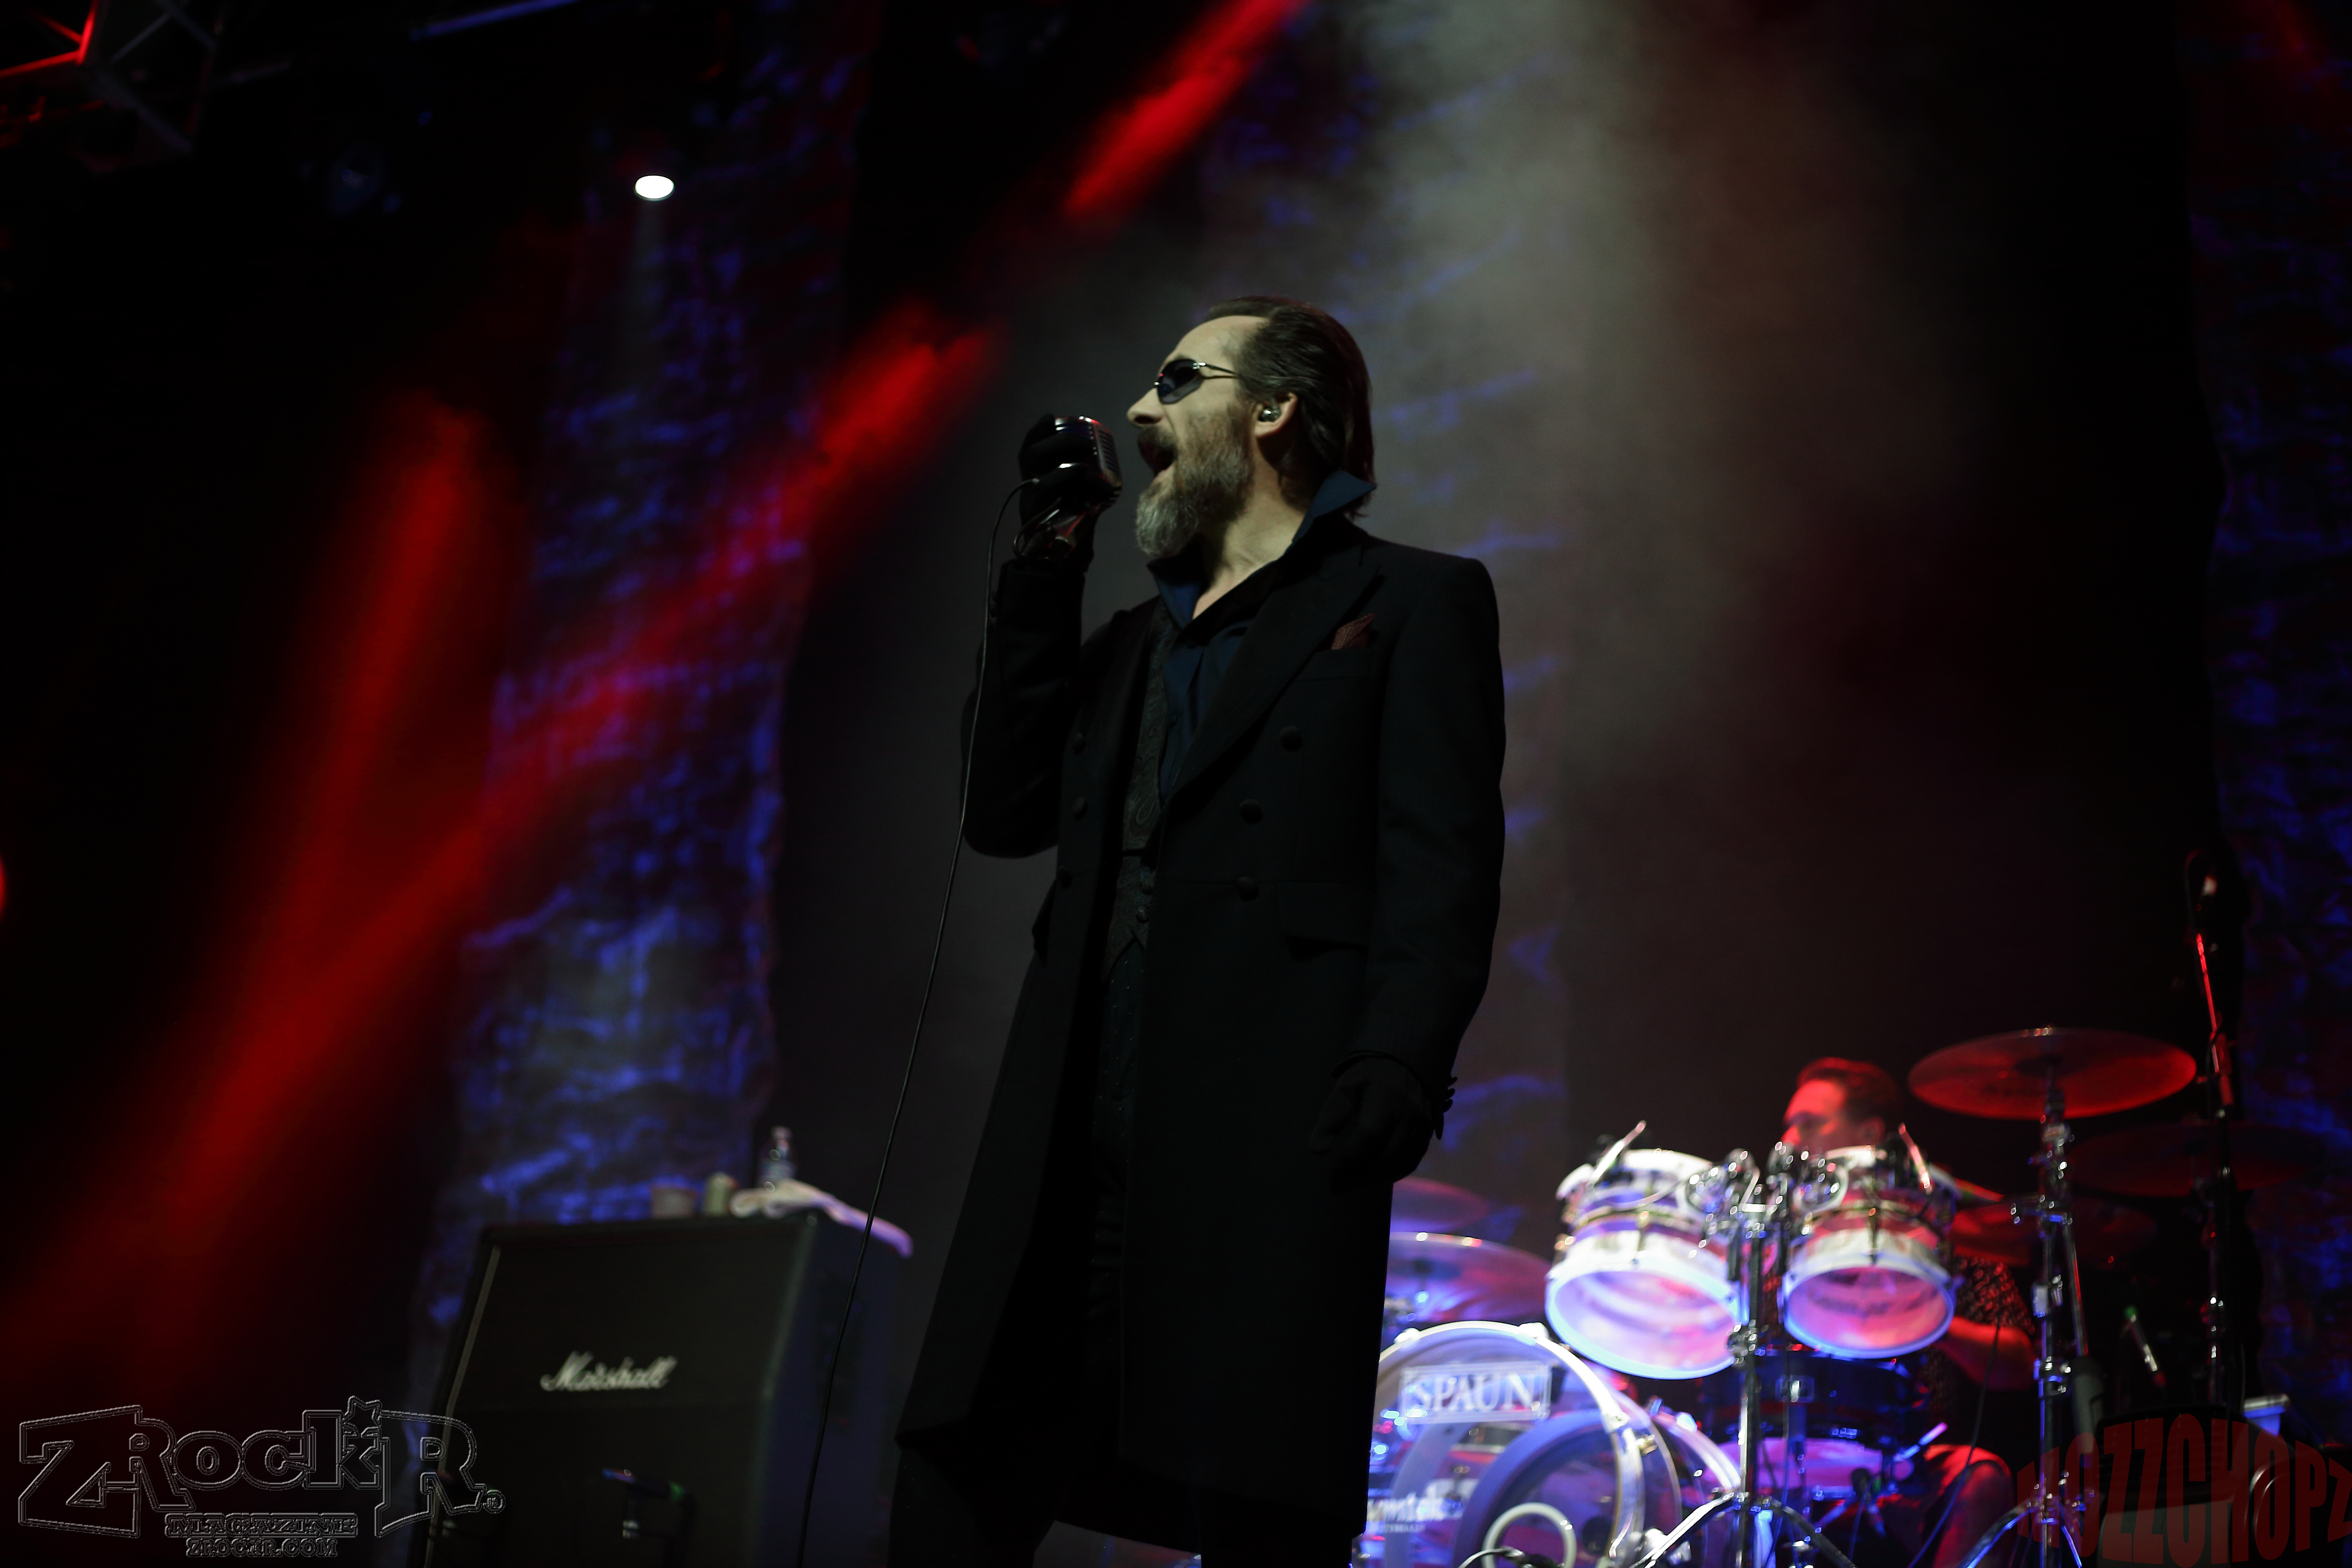 THE DAMNED 40th ANNIVERSARY TOUR ROARS INTO HOUSE OF BLUES VEGAS